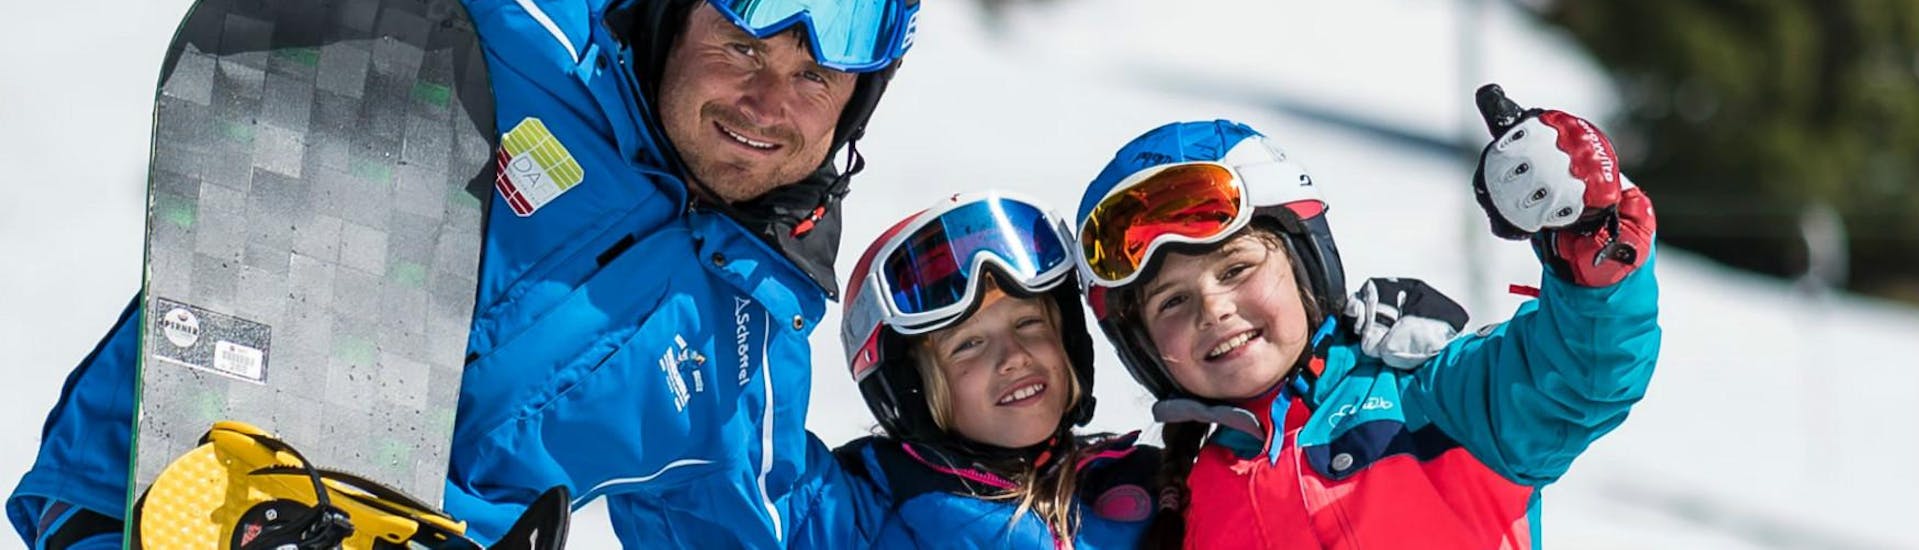 Kids Snowboarding Lessons (8-15 y.) "All Inclusive".